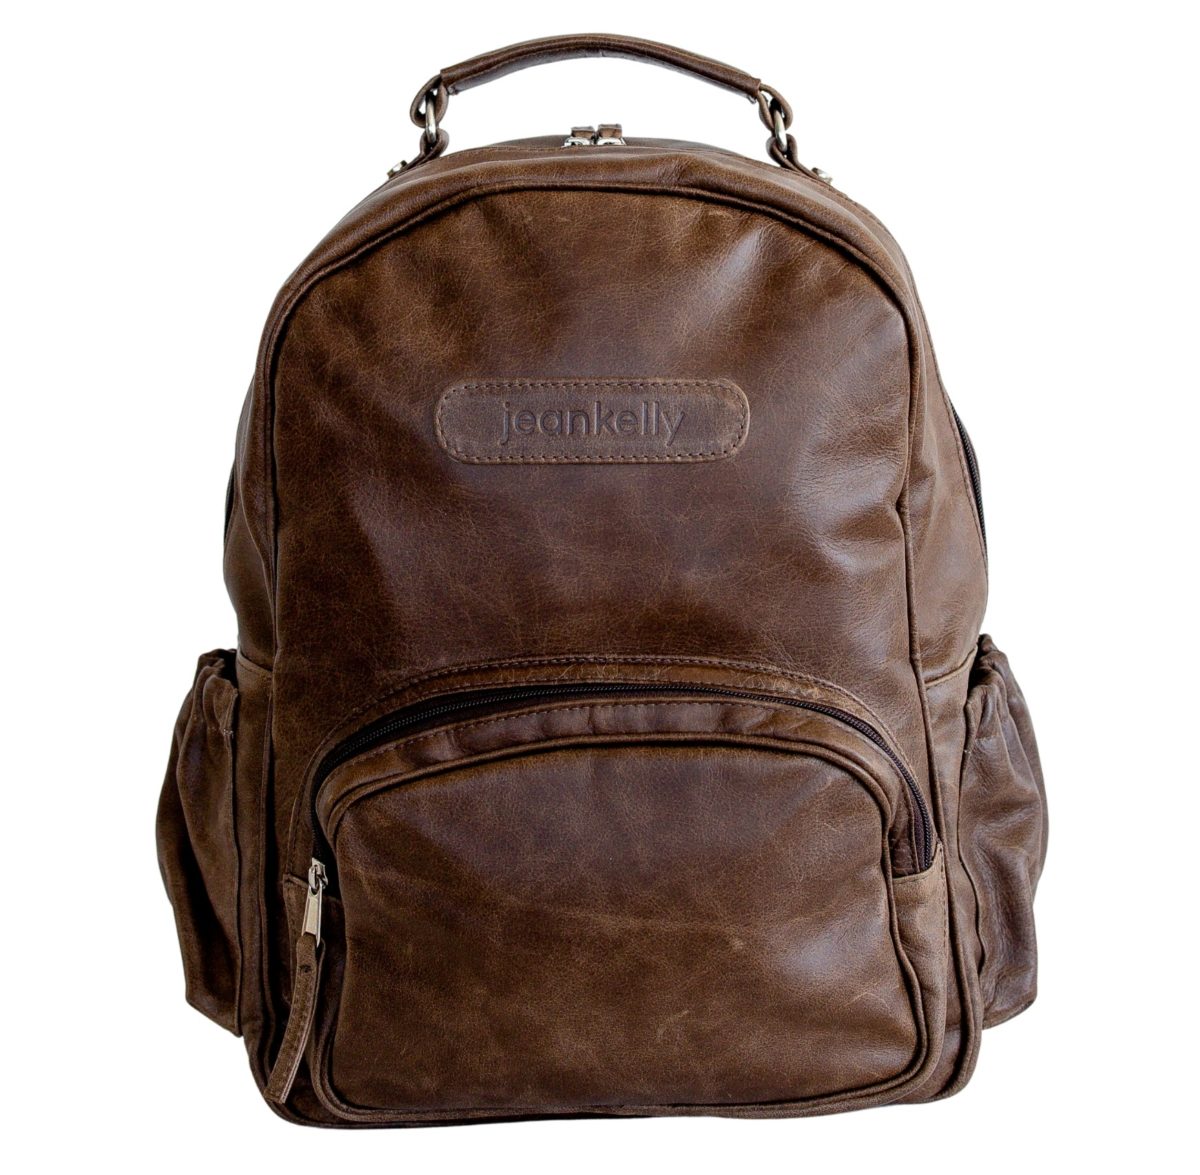 jeankelly coffee leather original backpack